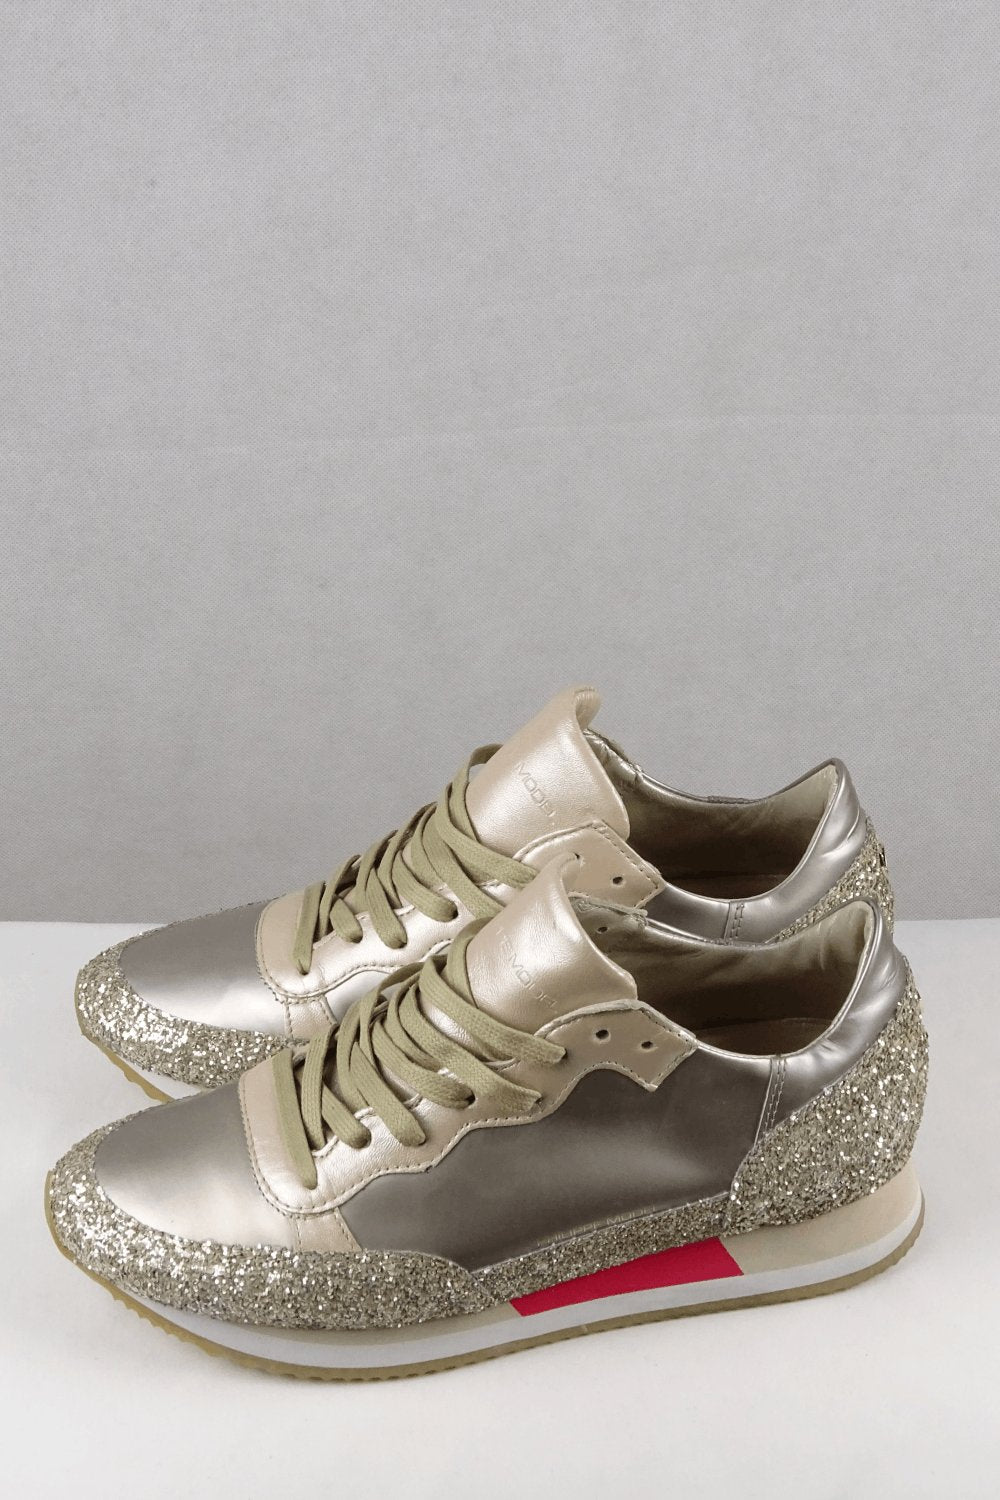 Phillippe Model Gold Sparkle Sneakers 41